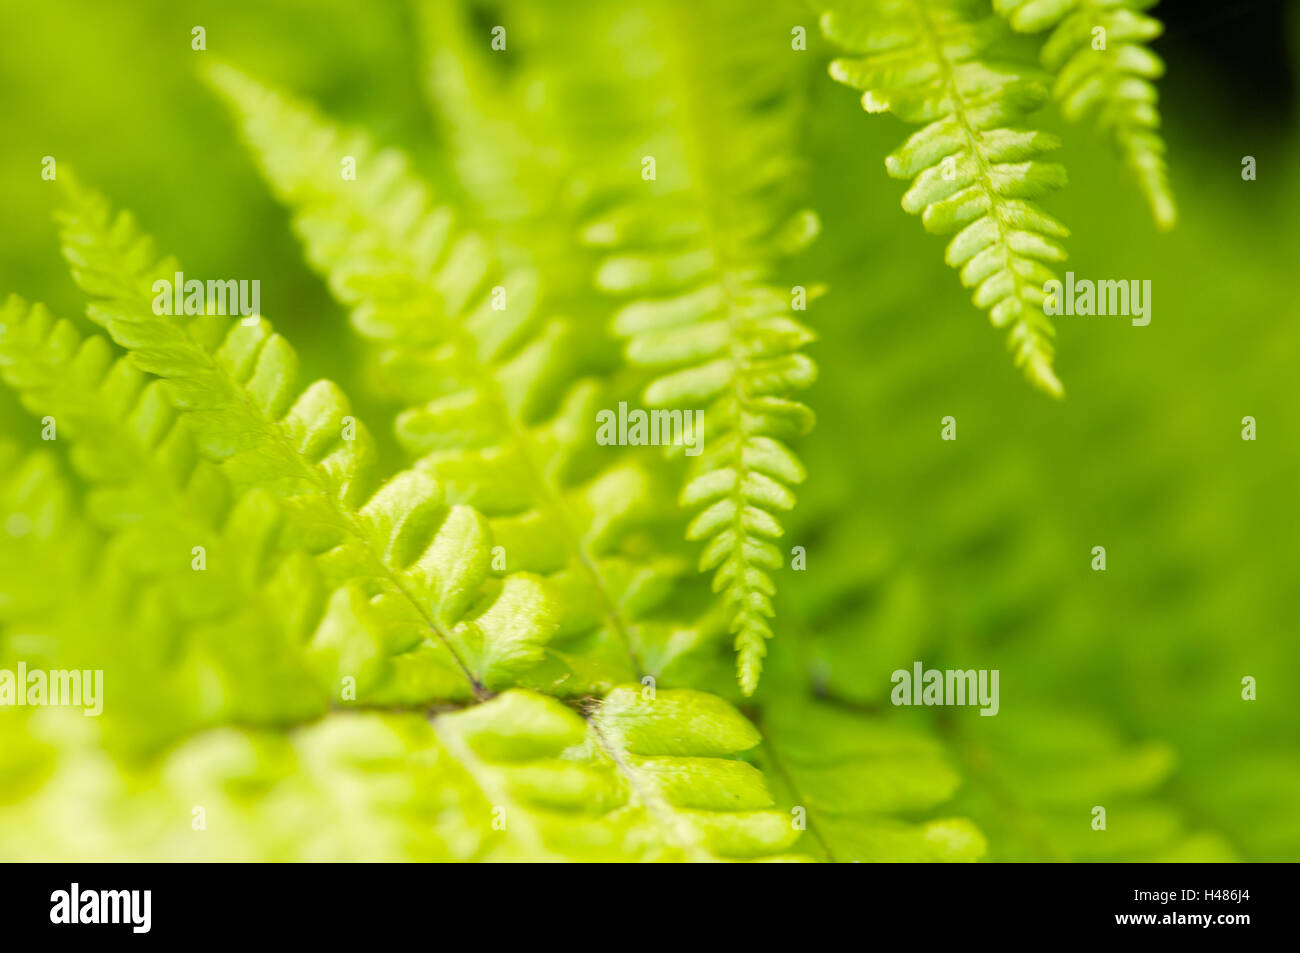 Scaly male fern, leaves, close-up, detail, Stock Photo